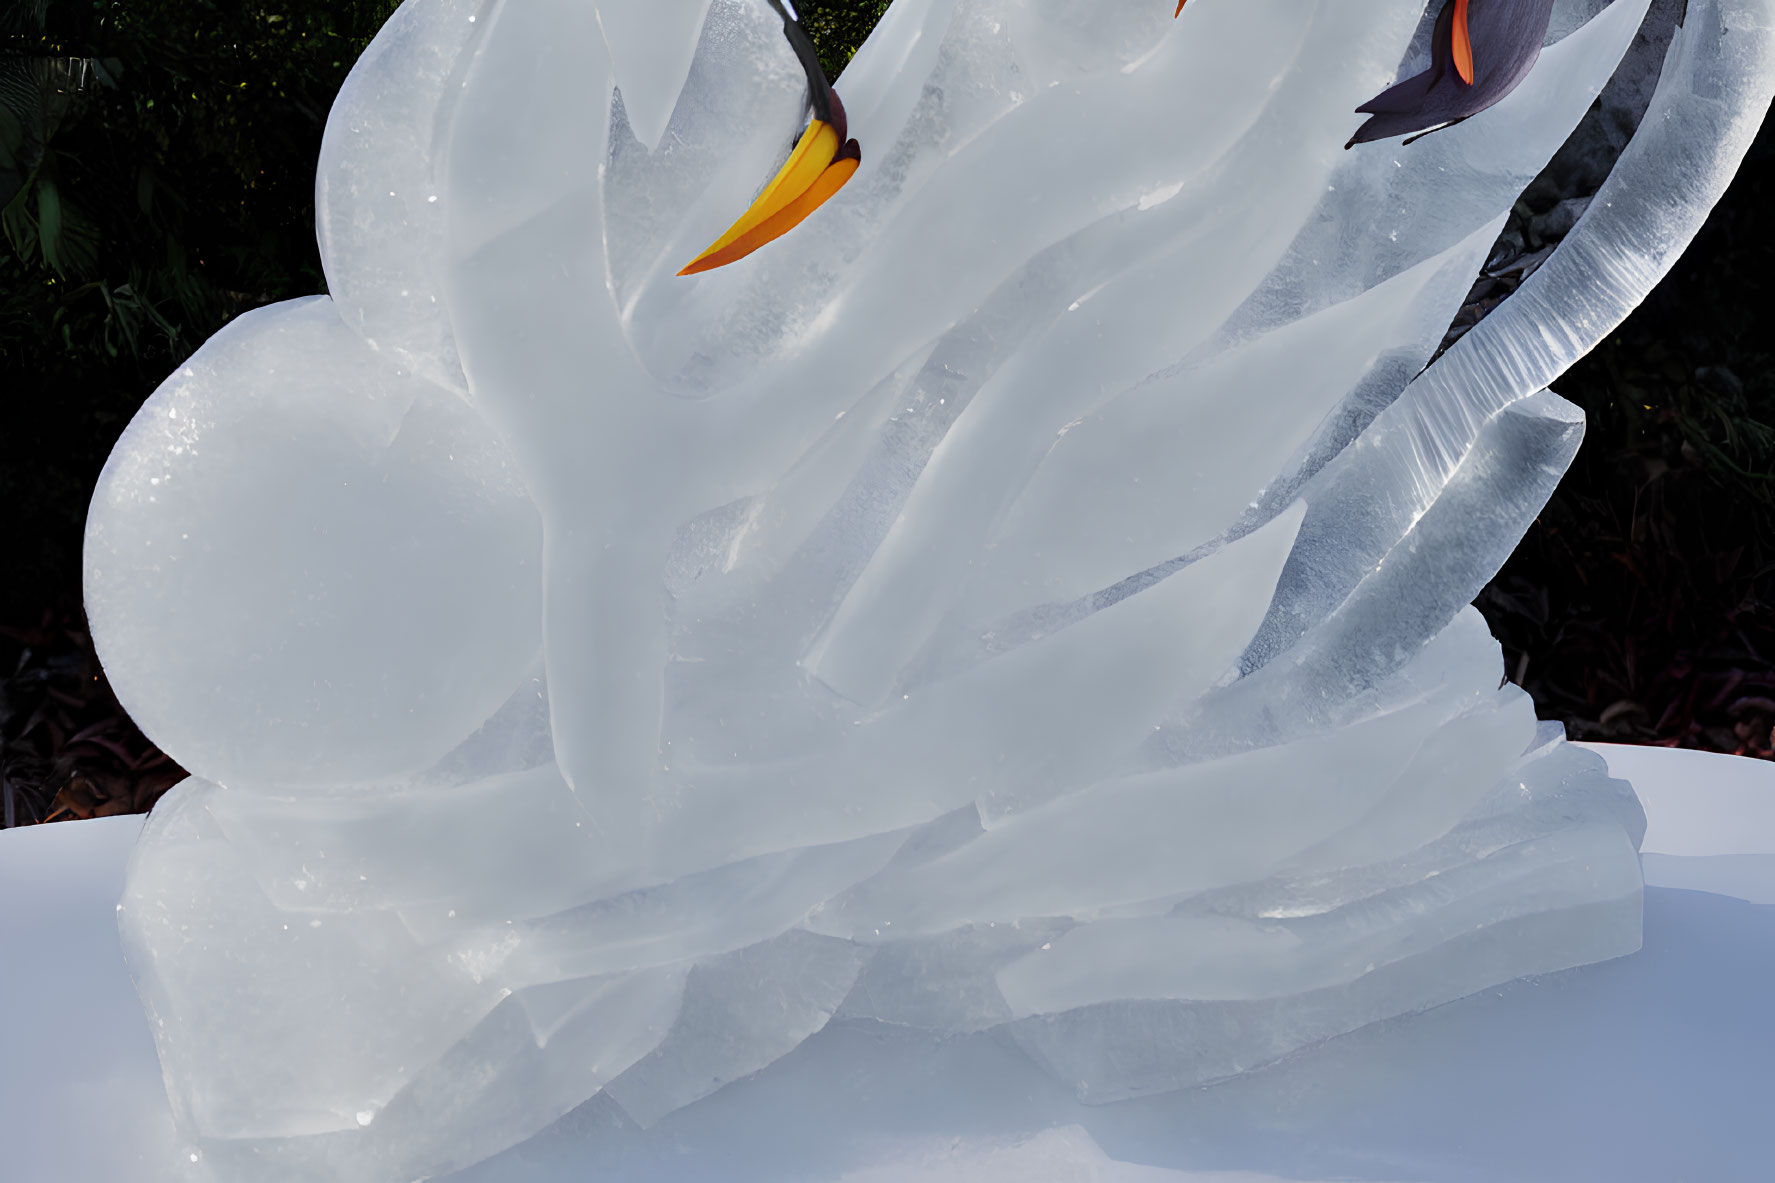 Detailed ice sculpture with swirling forms and bird beak-like elements